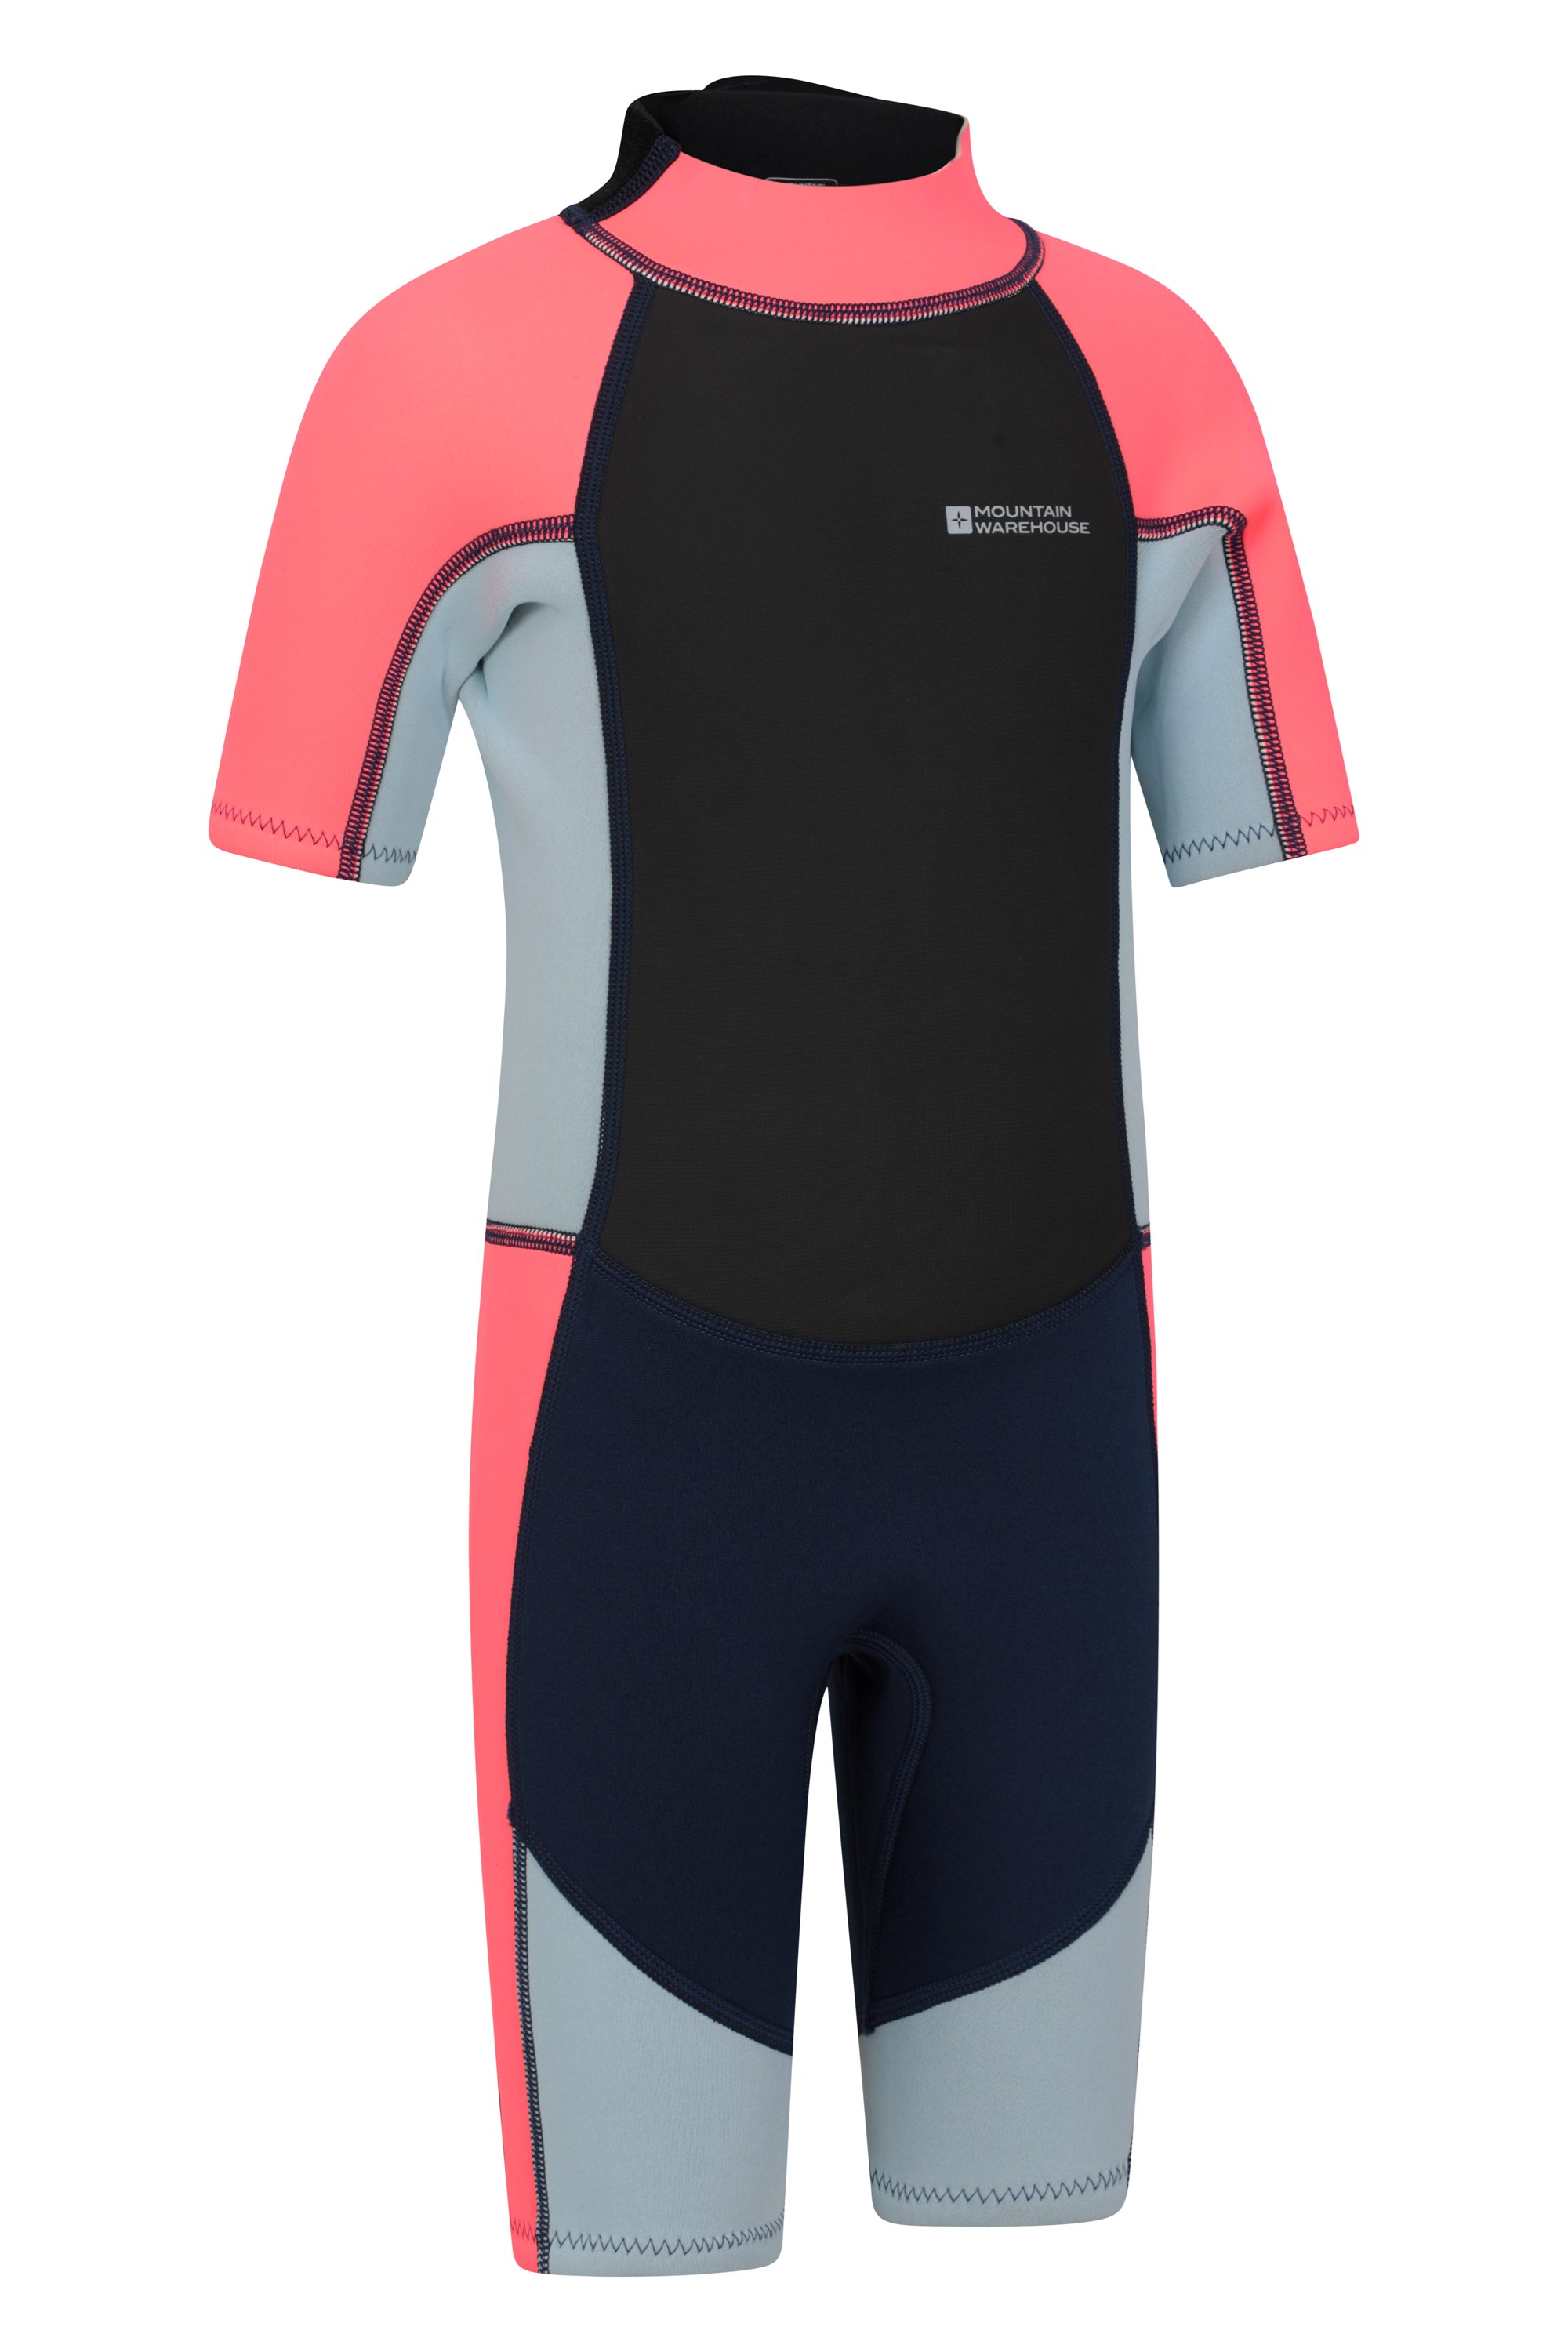 GoldFin Kids Wetsuit Shorty, Toddler Thermal Swimsuit 2mm Boys